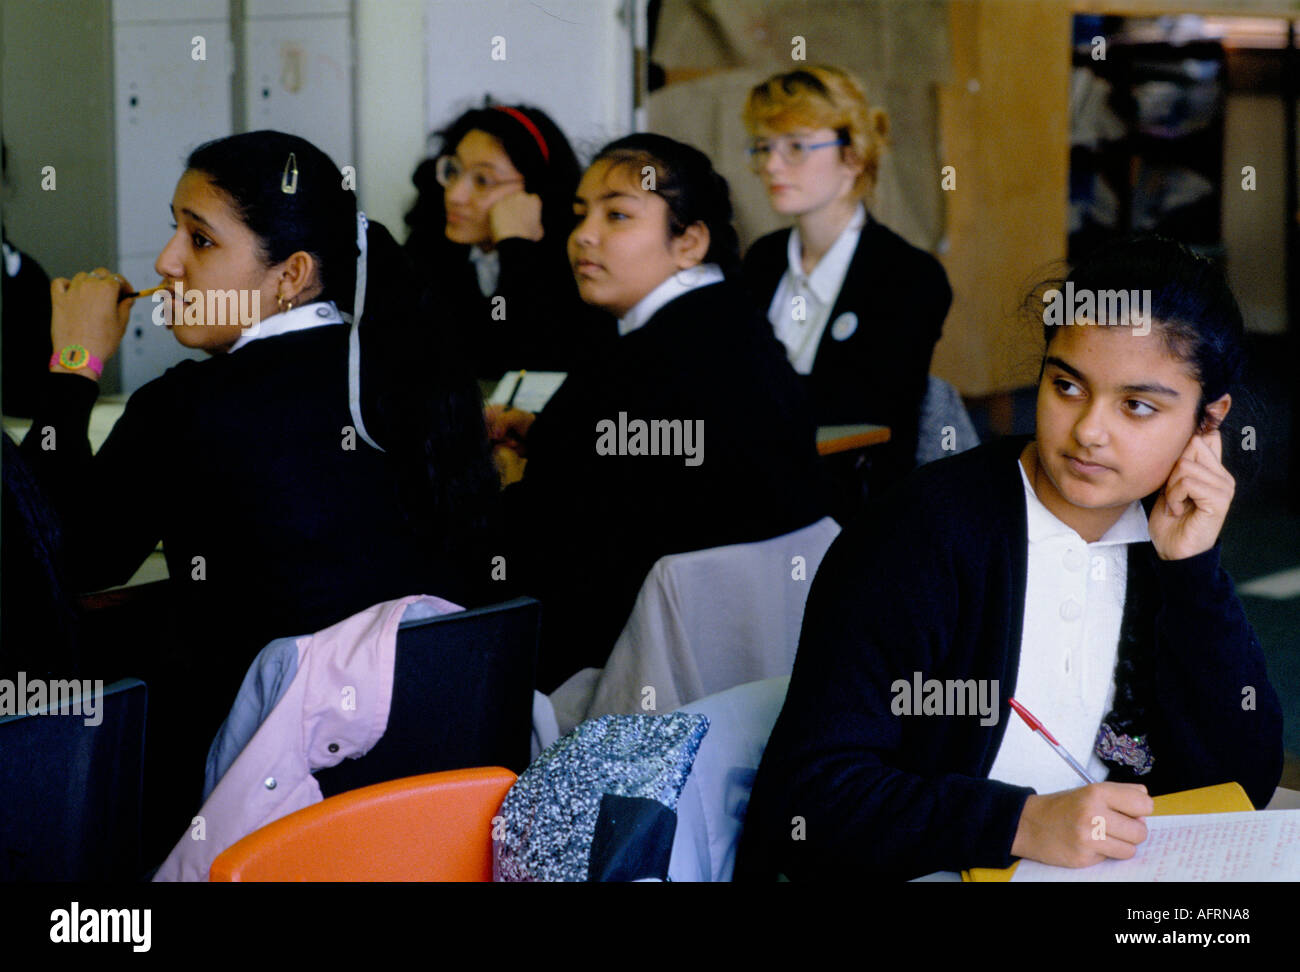 Secondary School 1990s UK. Mixed race group ethnic diversity girl students classroom Greenford High School, Middlesex  London 1990 England HOMER SYKES Stock Photo